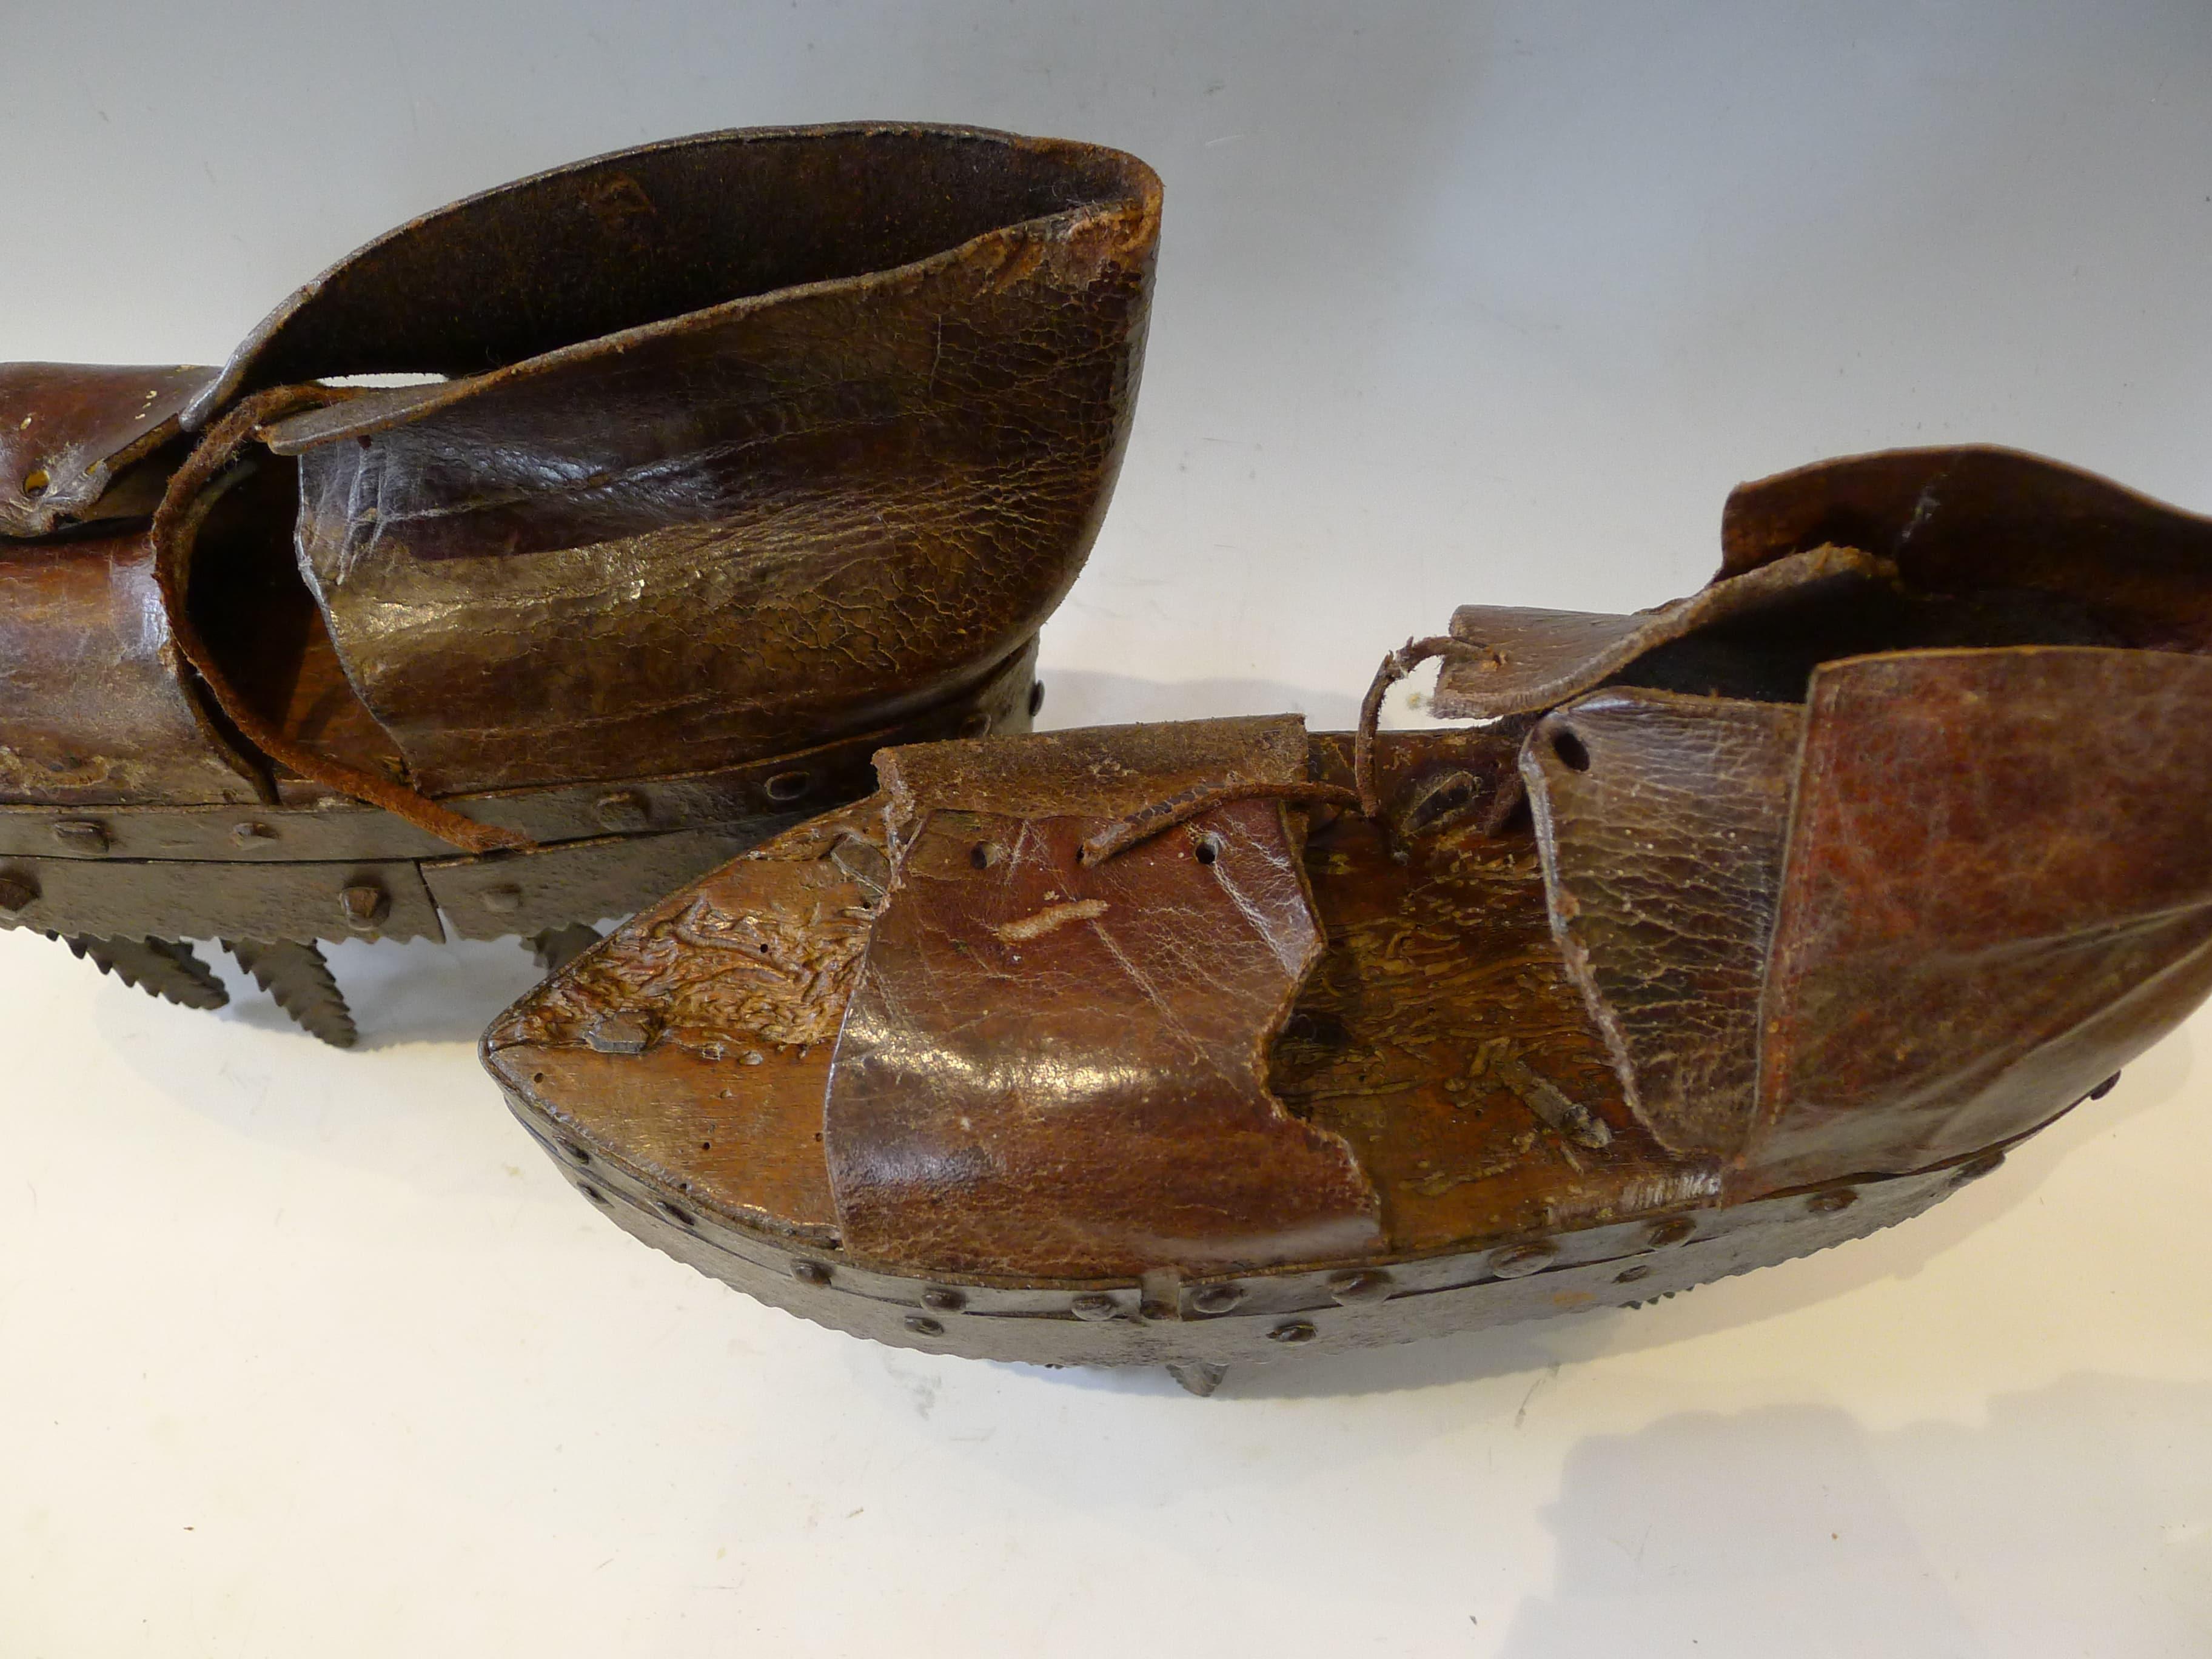 Footwear with sawtooth spikes, to debug chestnuts on land.
Incredible objet from France, Lozère (South of France)
Made with iron, leather and wood.
 